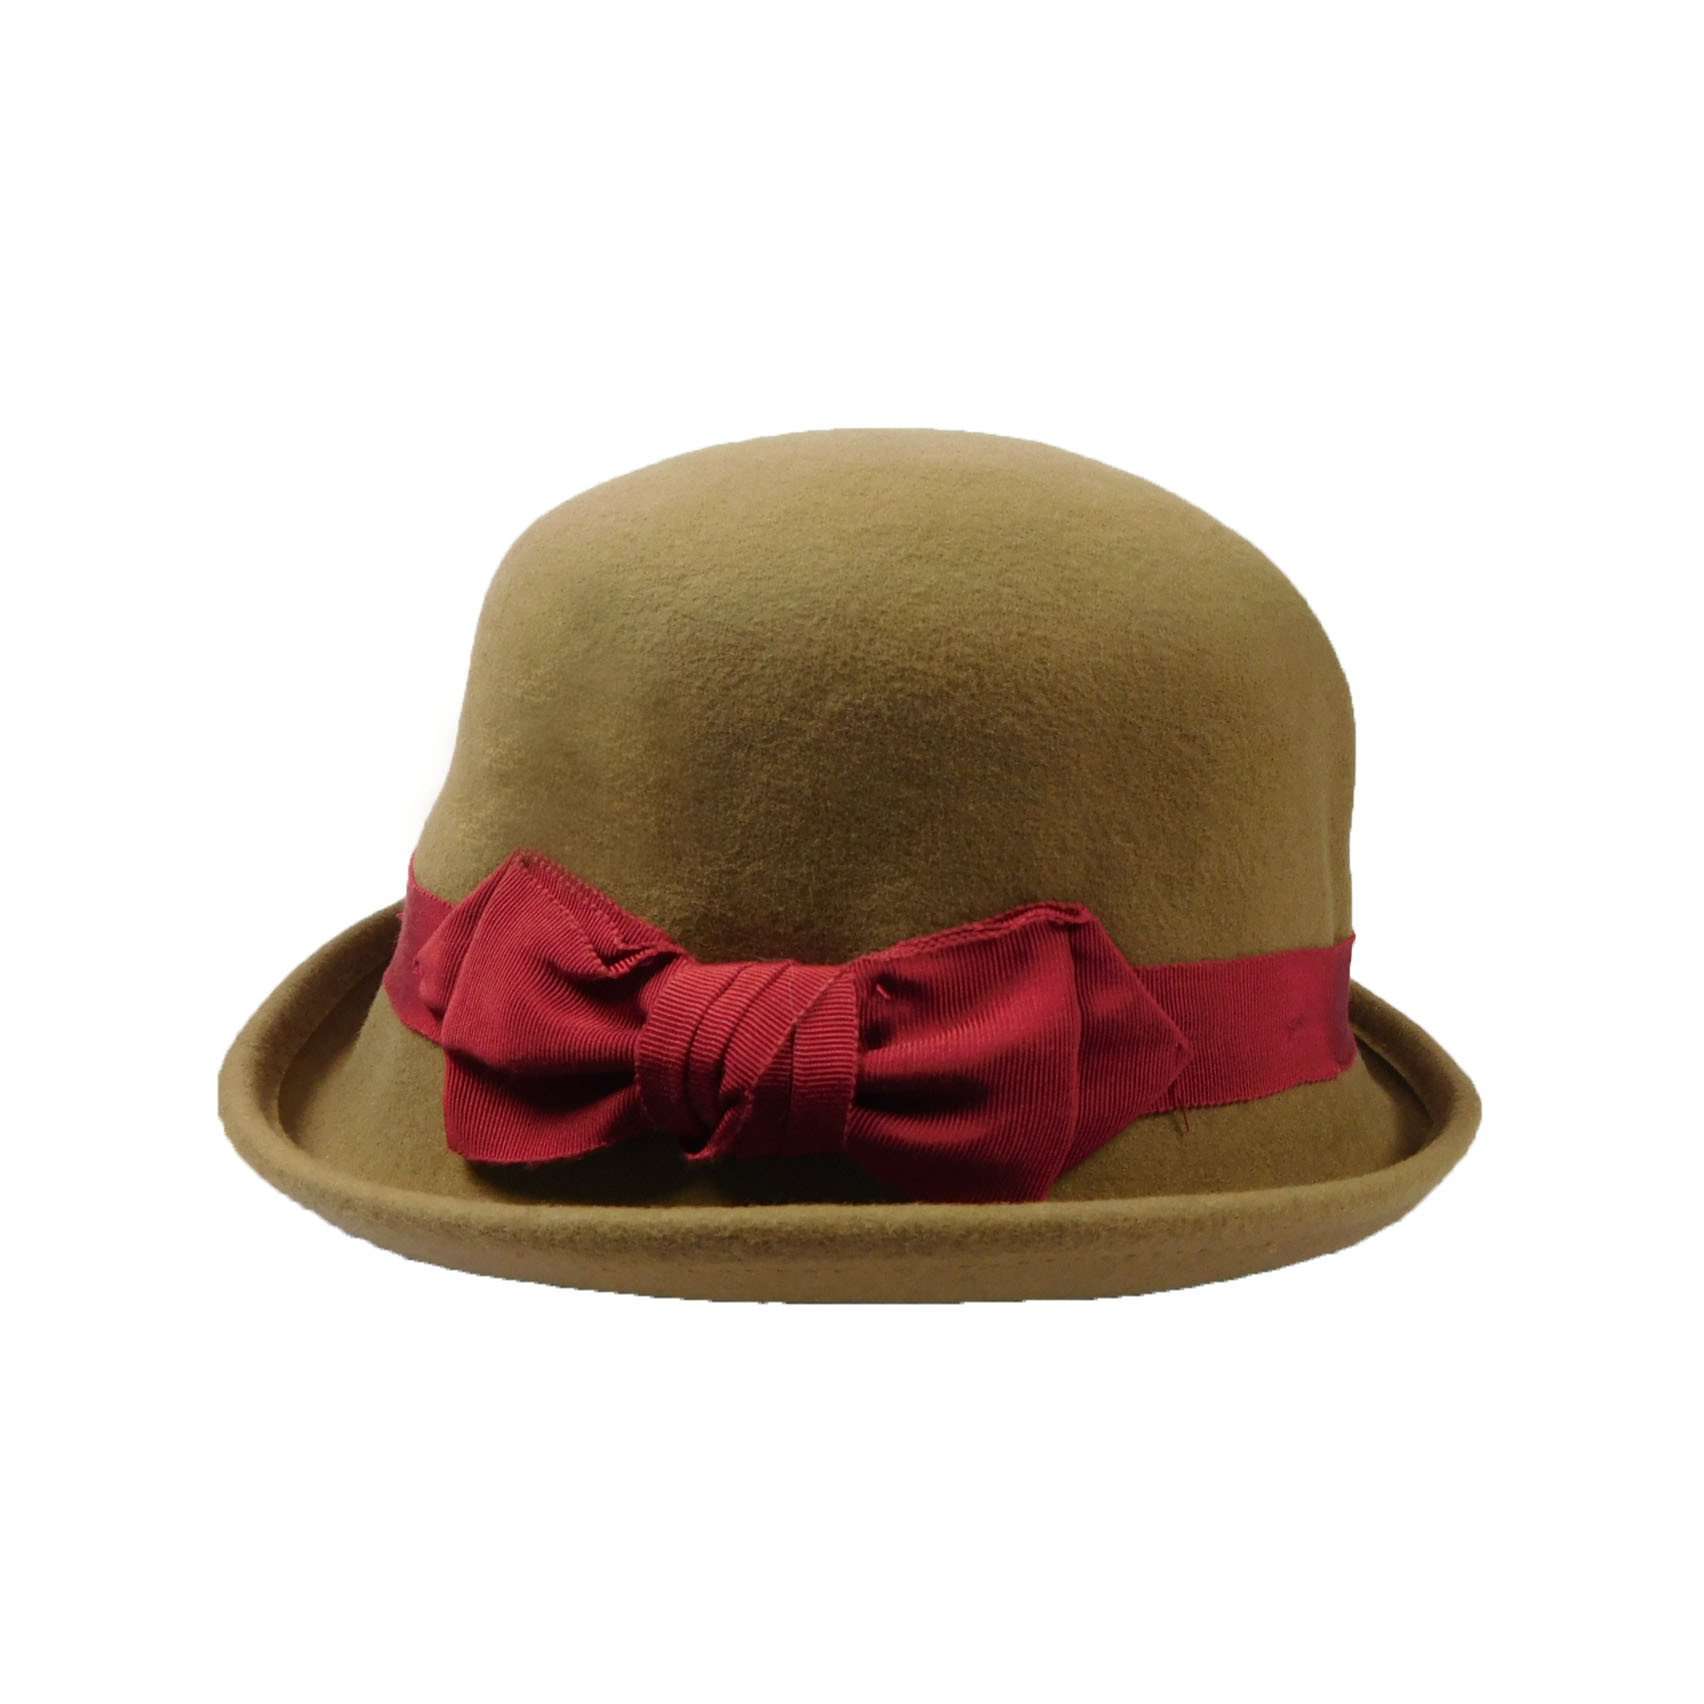 Bowler with Red Satin Bow Bowler Hat Jeanne Simmons    